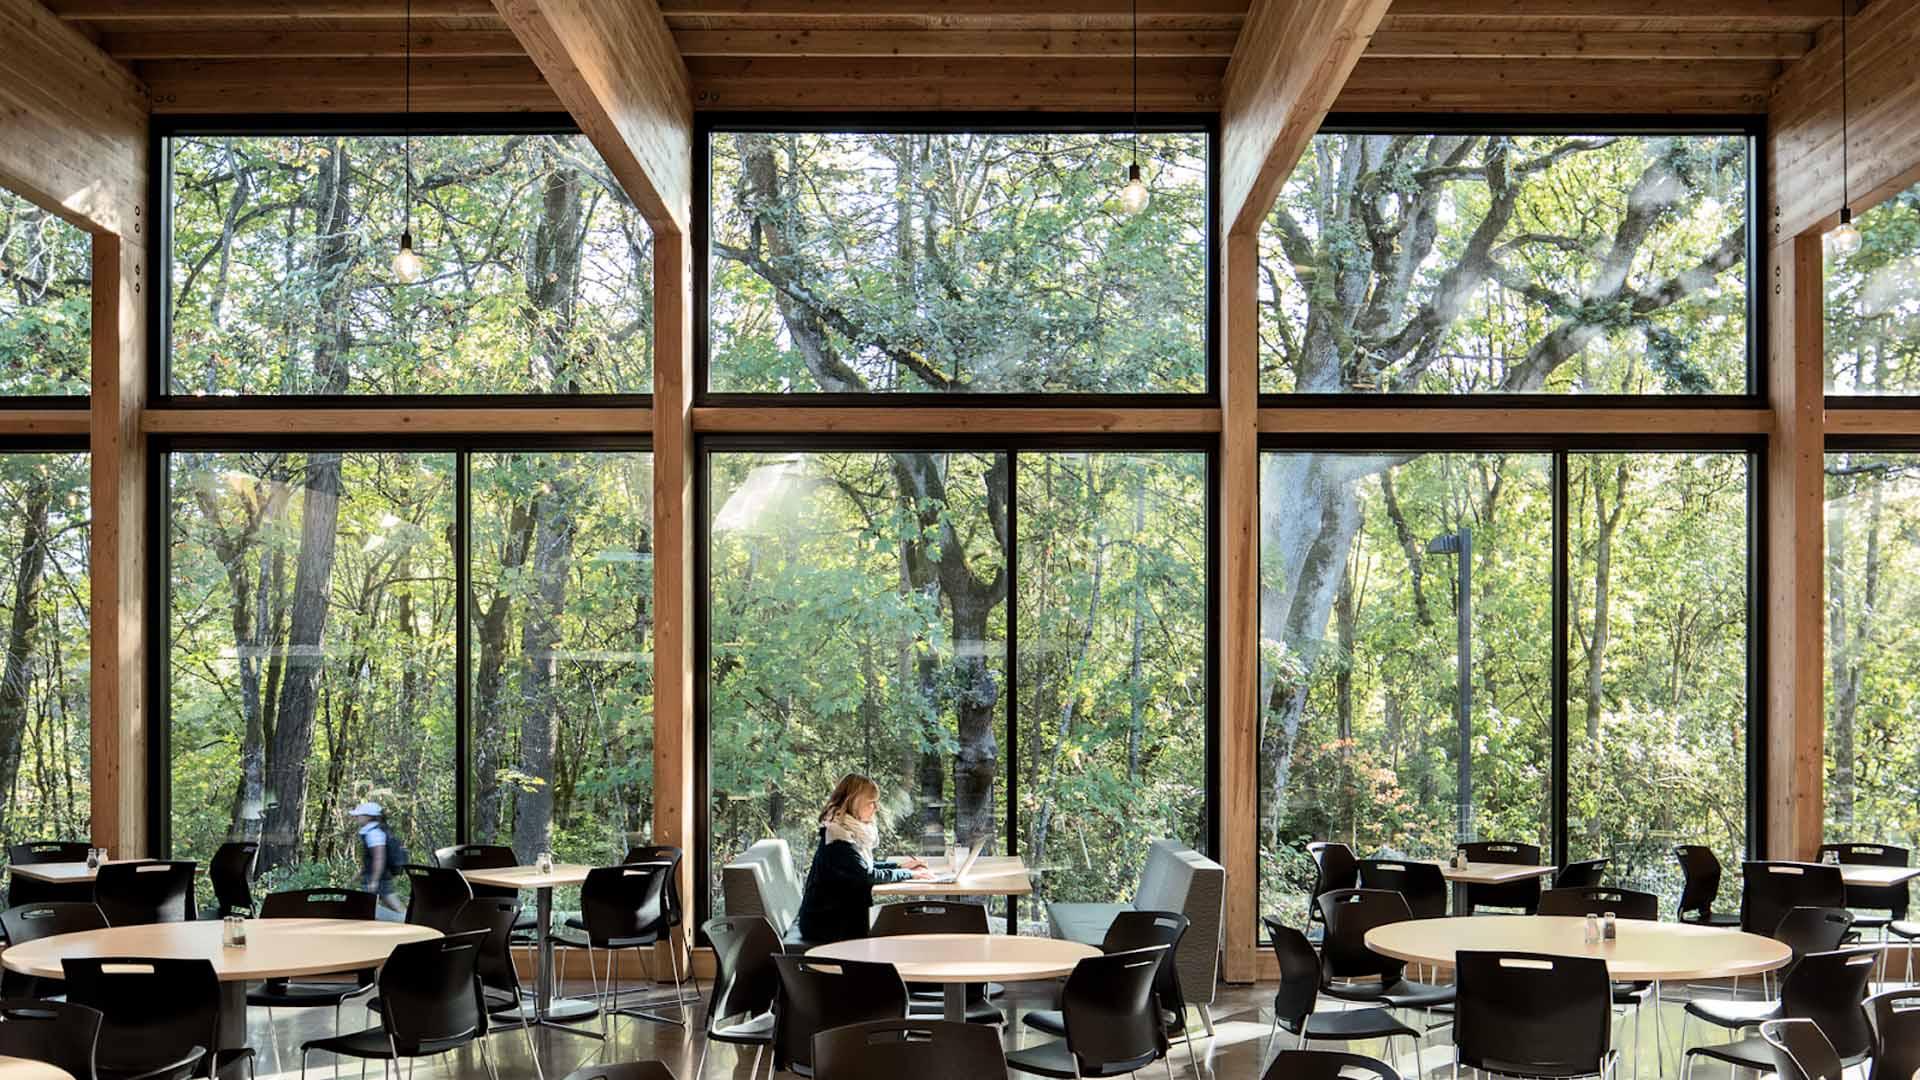 Canyon Commons photo - a large bank of windows in a mass timber building look out at a wooded area. 一位女士坐在前景中的一张桌子旁.